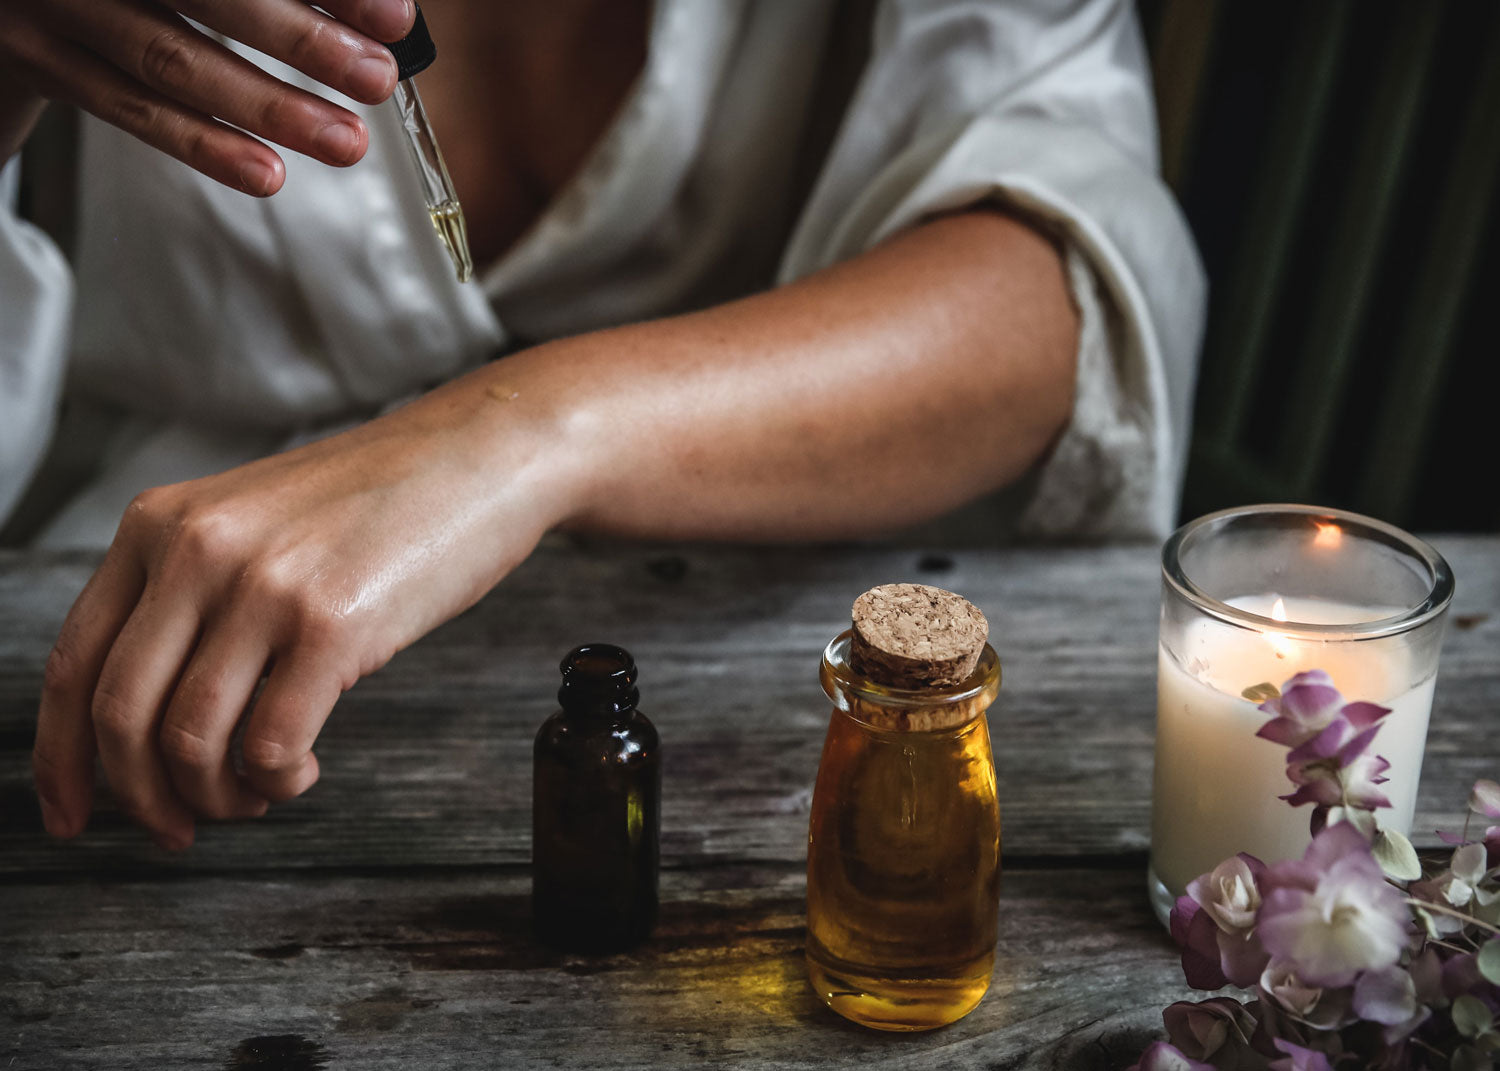 Accessories for Exploring New Ways to Enjoy Essential Oils